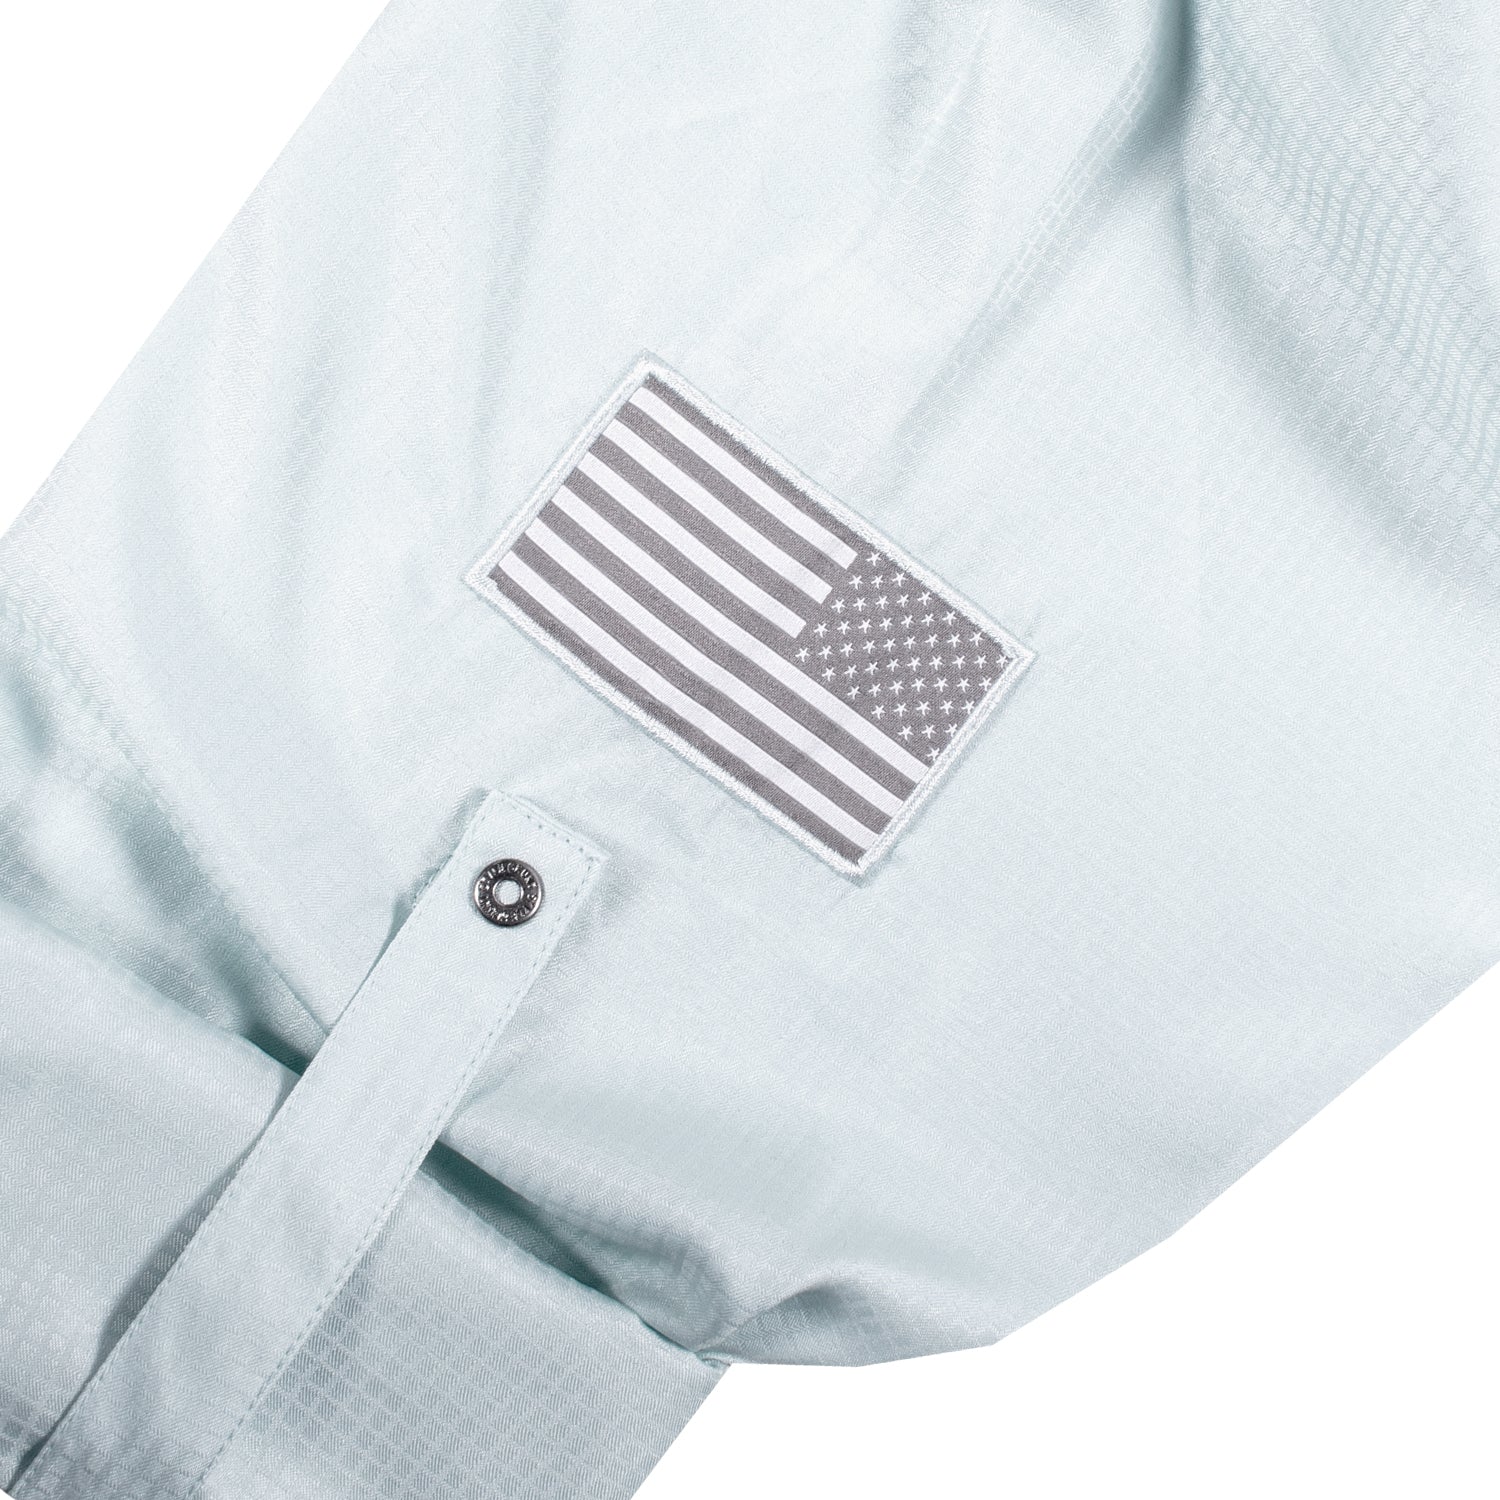 The sleeve of the Grunt Style Long Sleeve Fishing Shirt in Seafoam that has the Assaulting Flag patch and sleeve roll up tabs with custom buttons